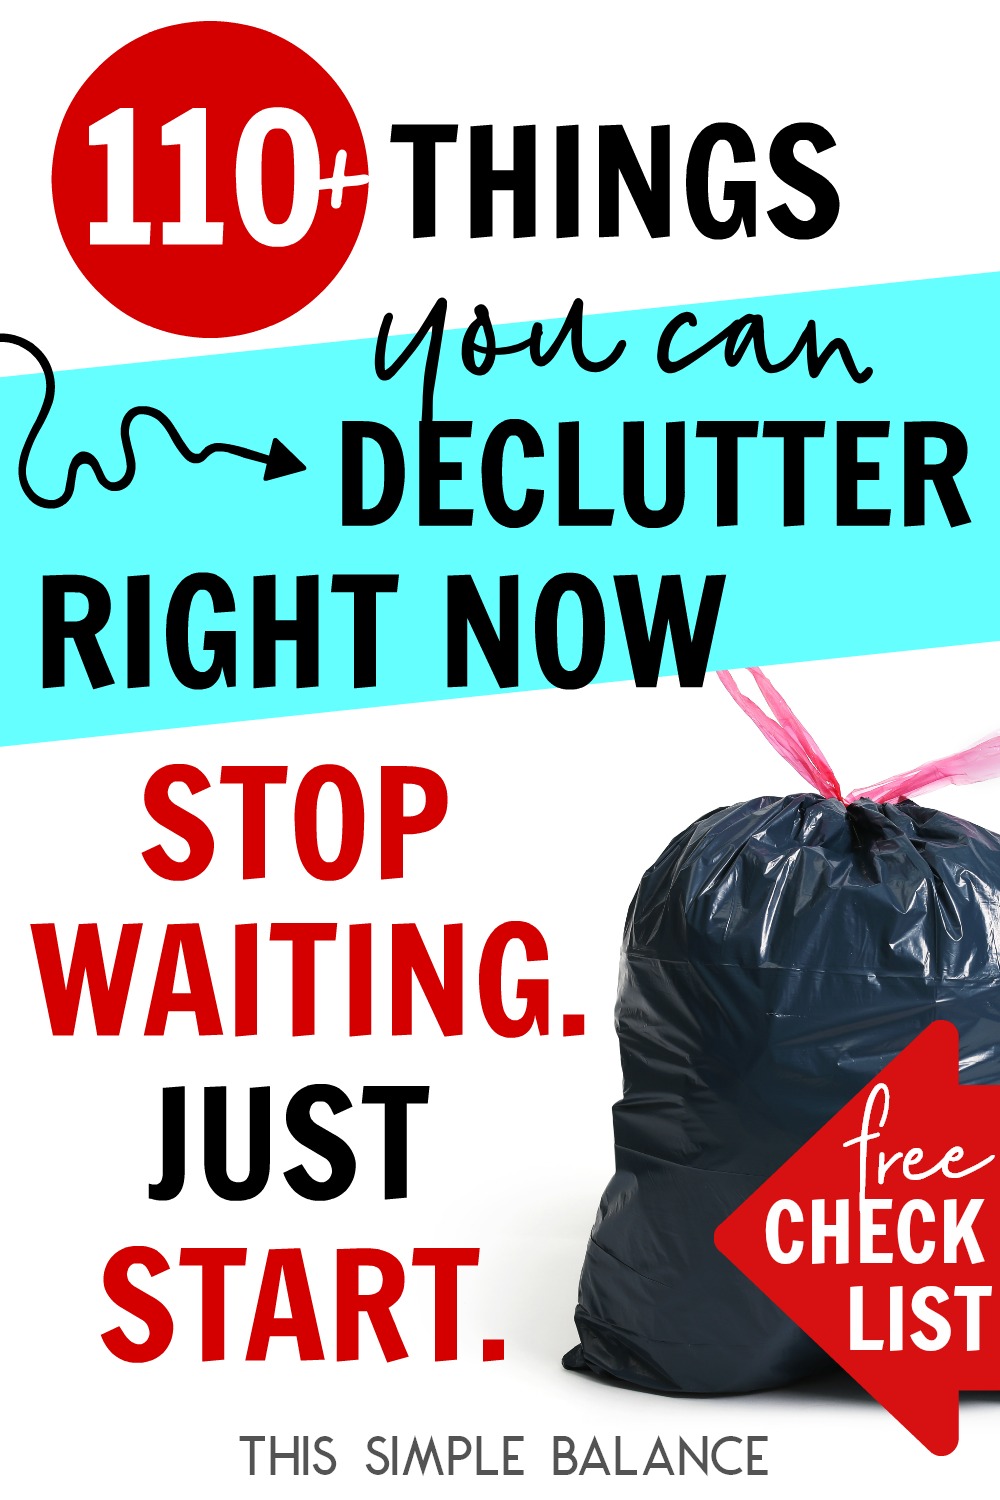 black trash bag with pink tie, with text overlay, "110+ things you can declutter right now - stop waiting, just start, FREE Checklist"